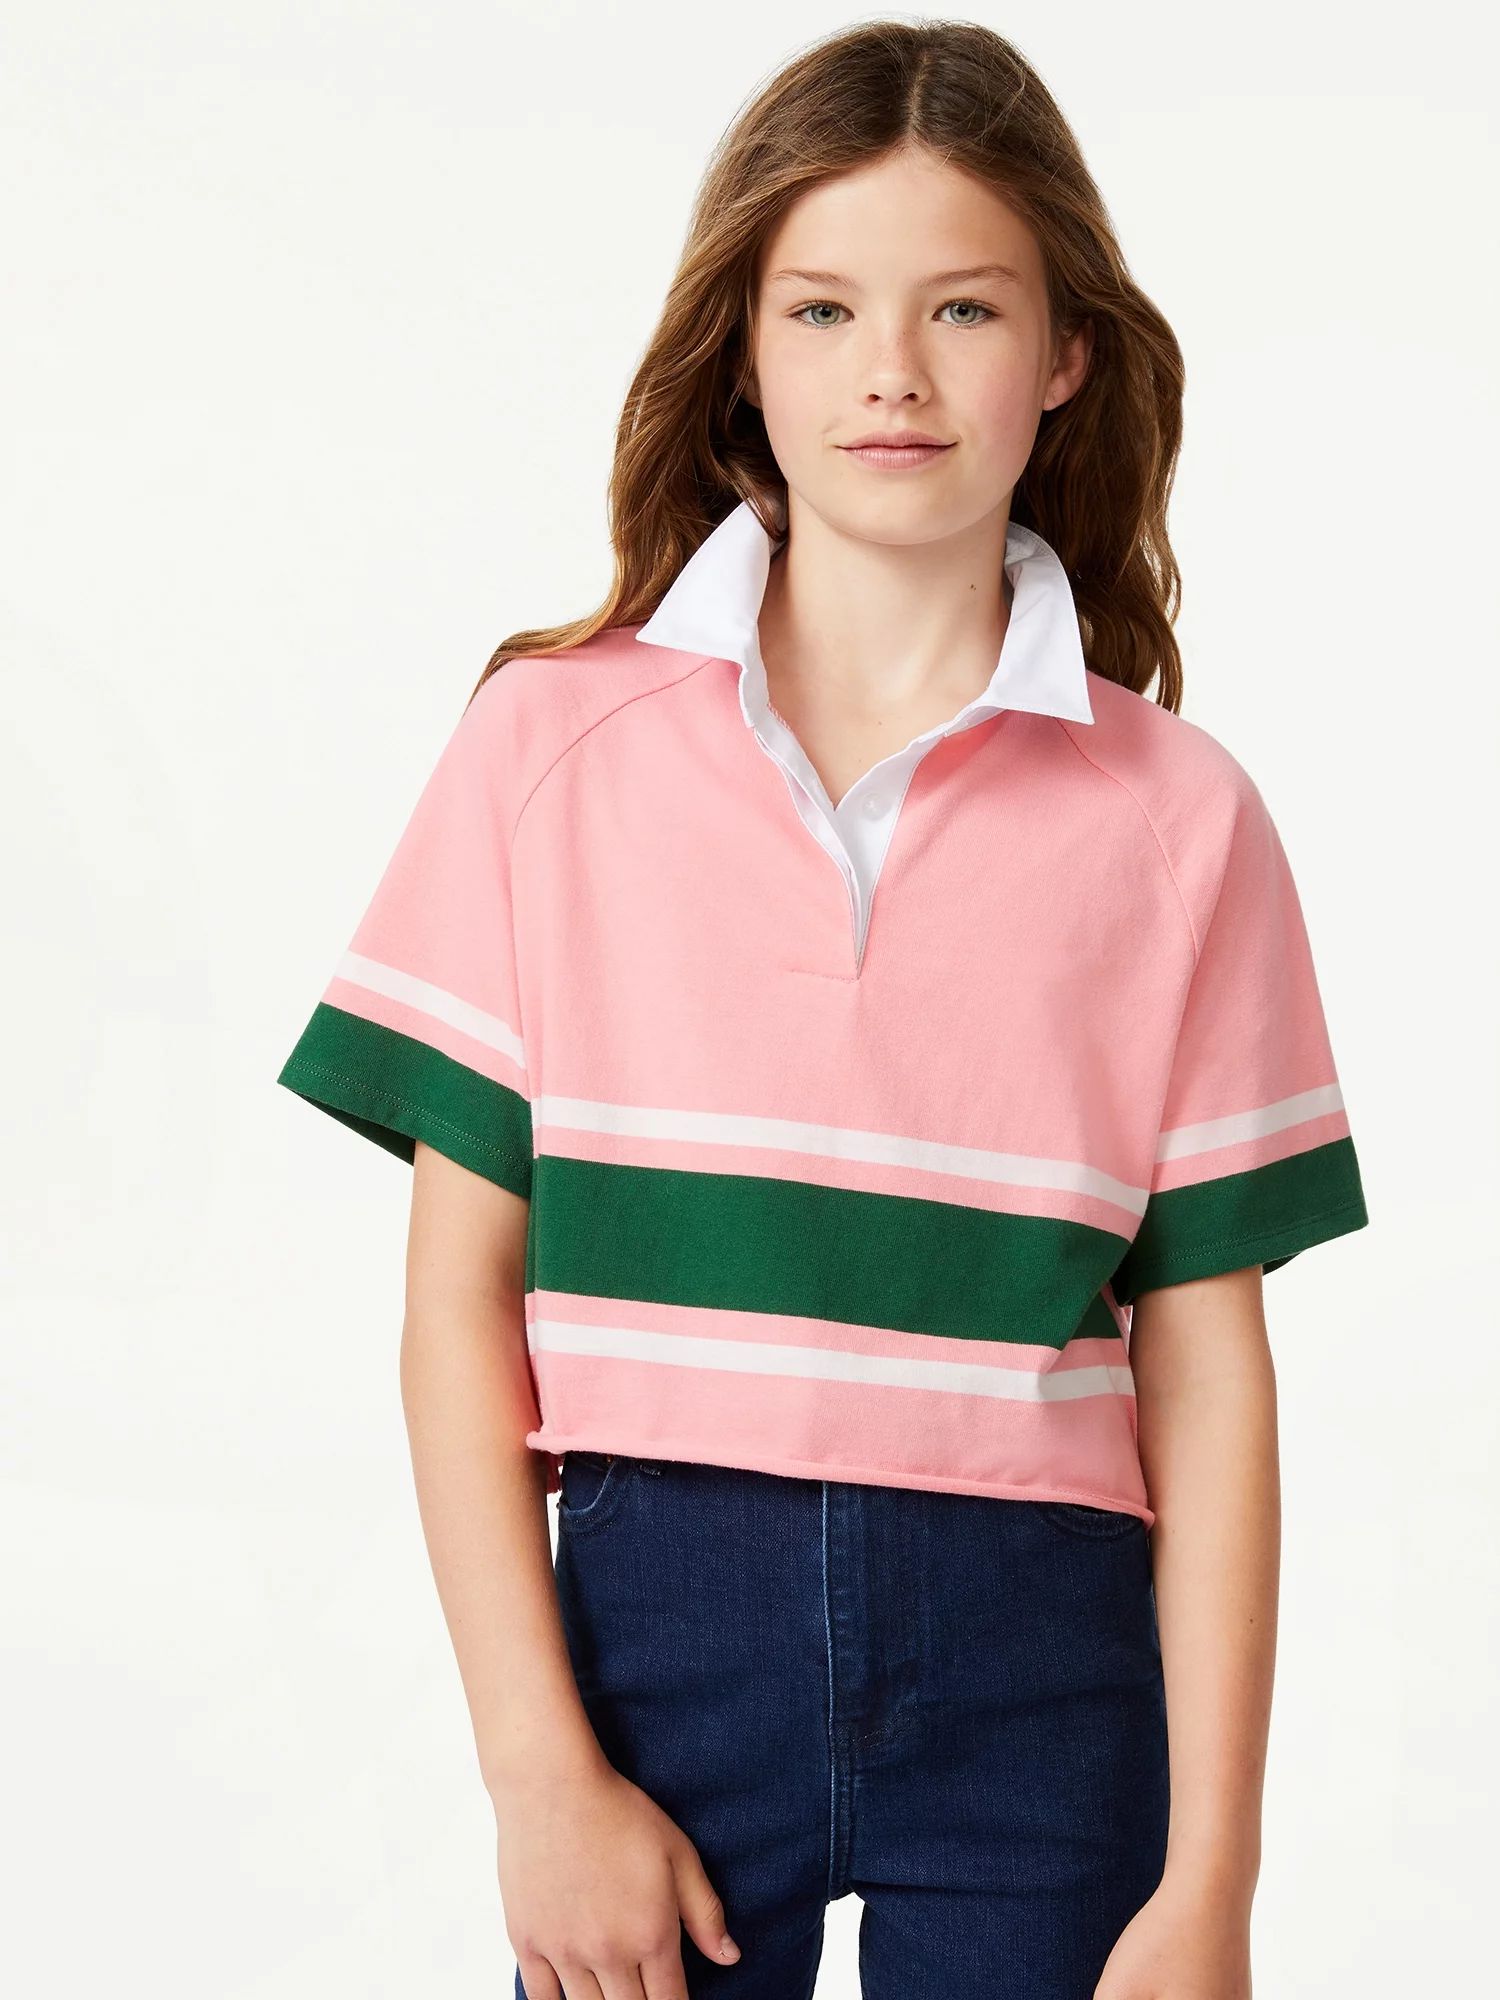 Free Assembly Girls Rugby Stripe Polo Shirt, Sizes 4-18 | Walmart (US)